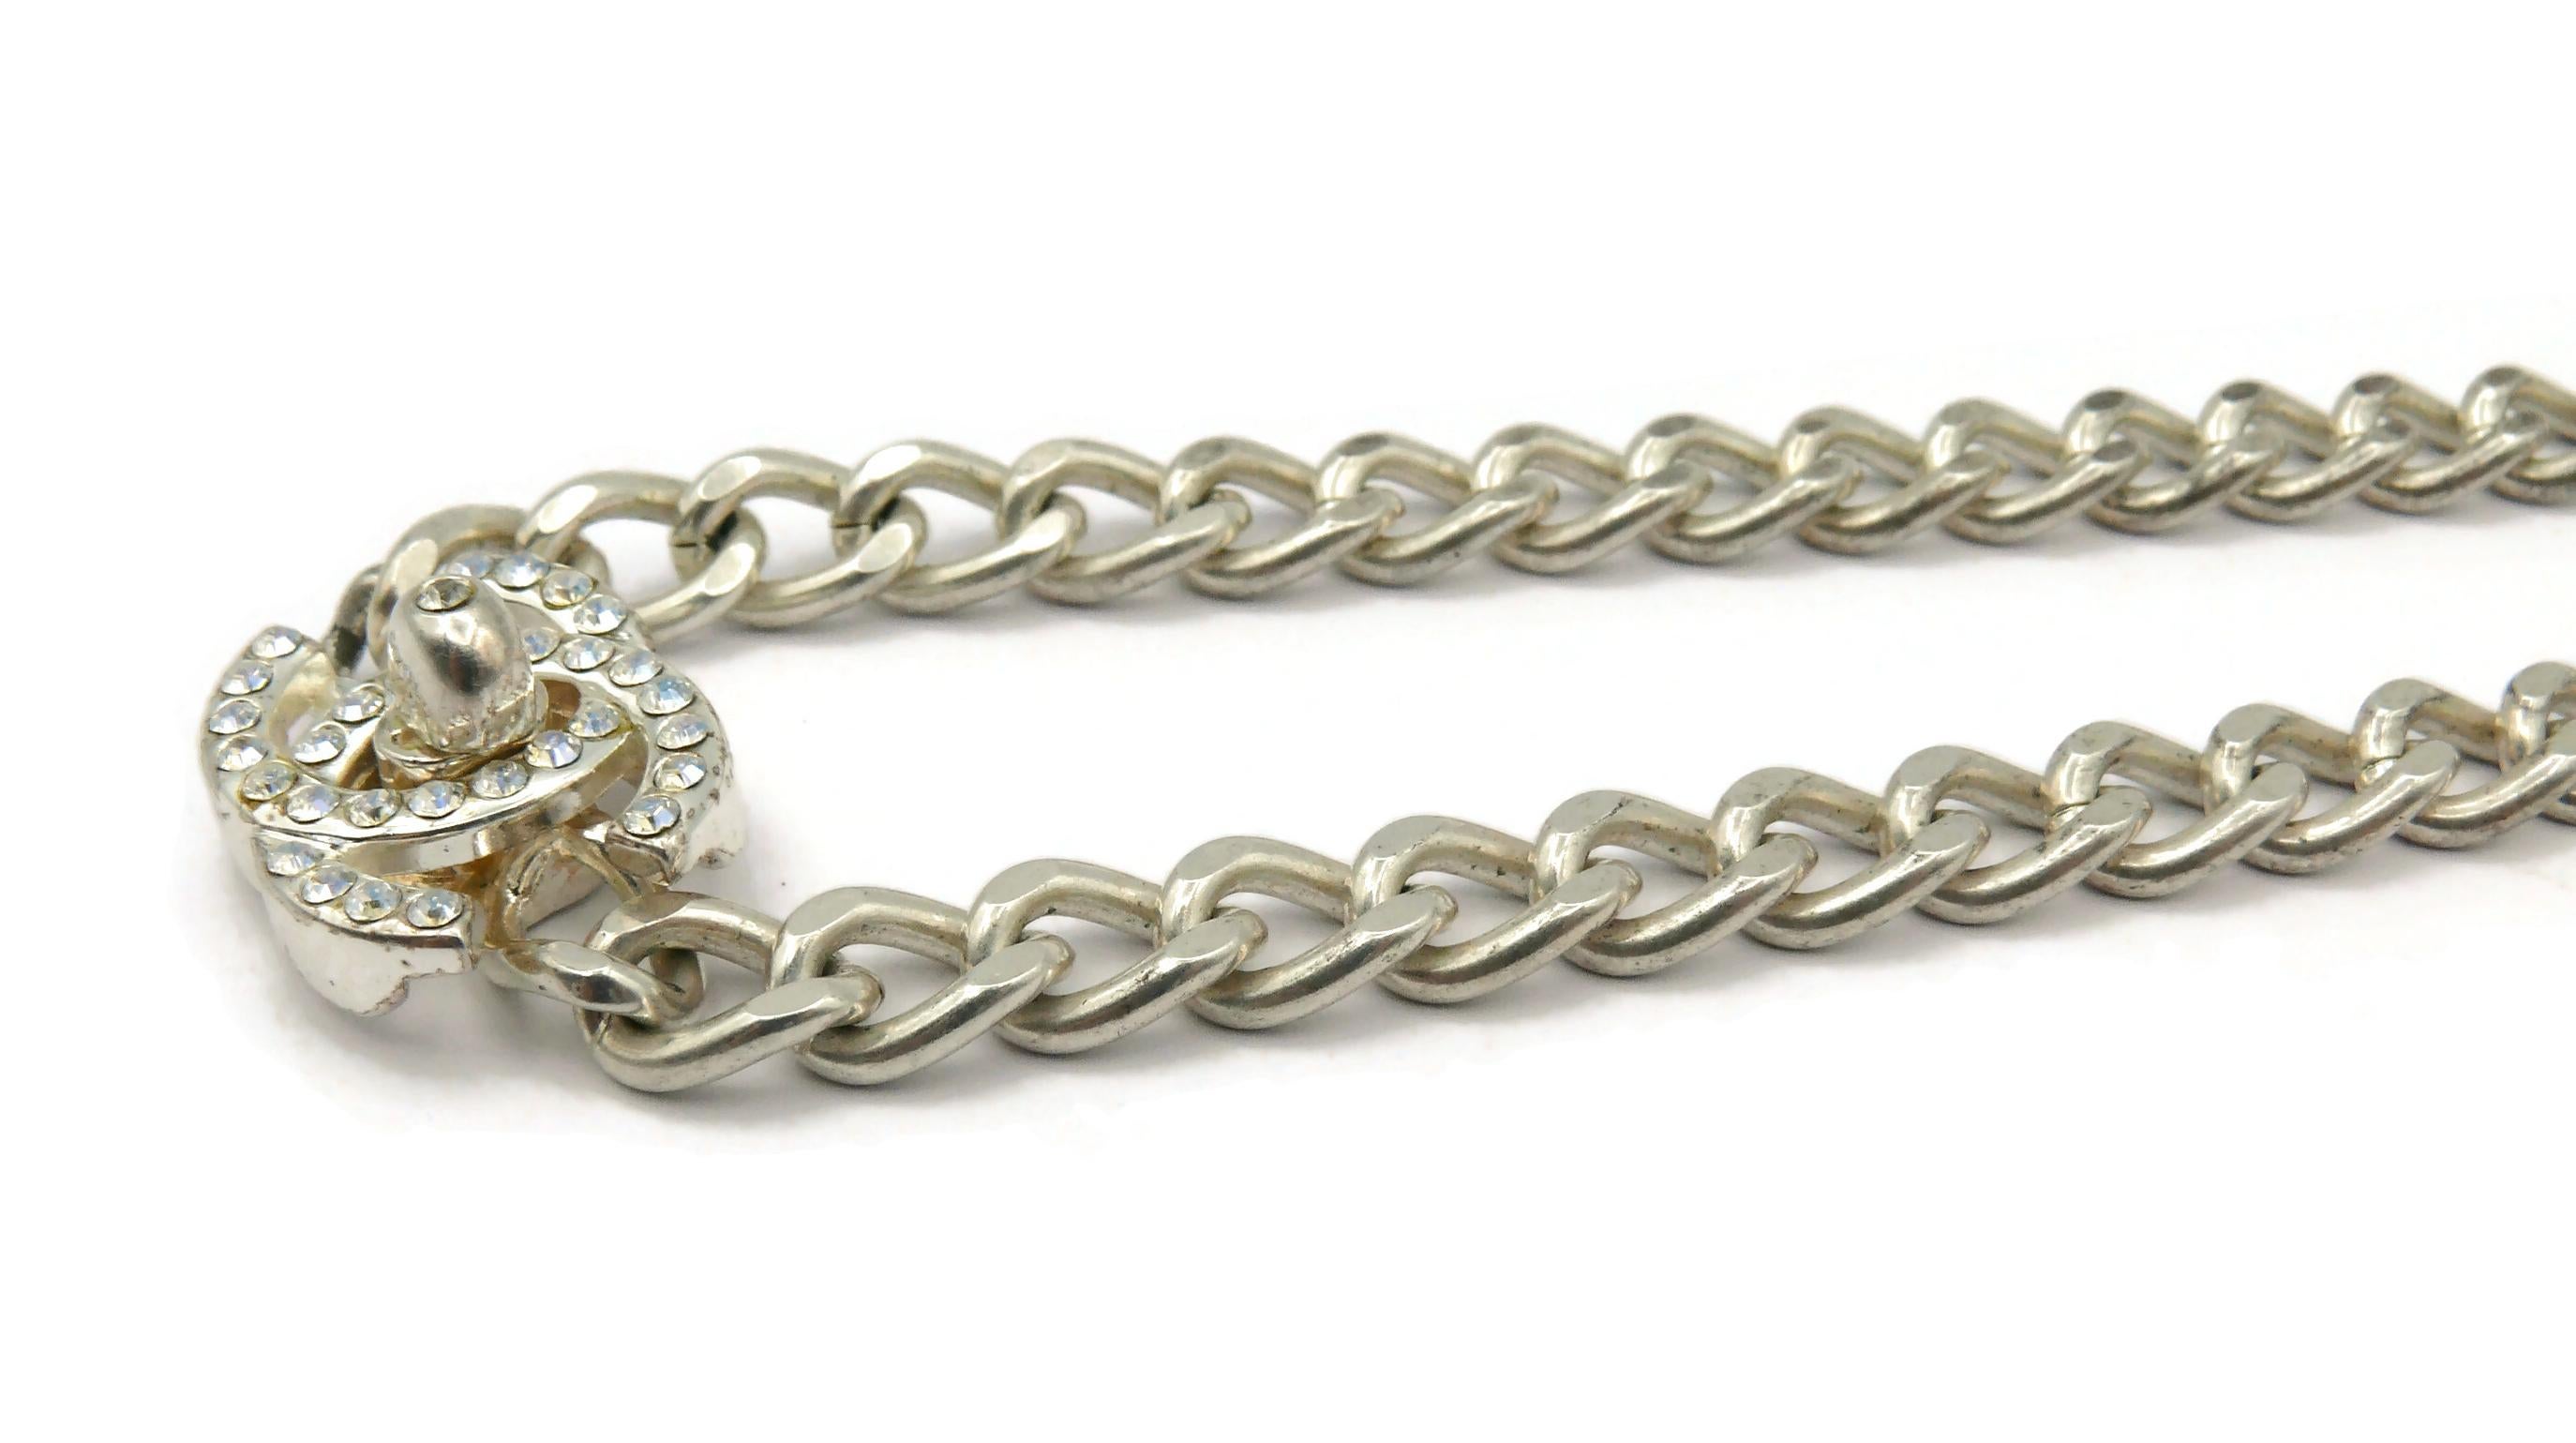 CHANEL by KARL LAGERFELD Vintage 1996 Silver Tone Jewelled Turn-Lock Necklace For Sale 3